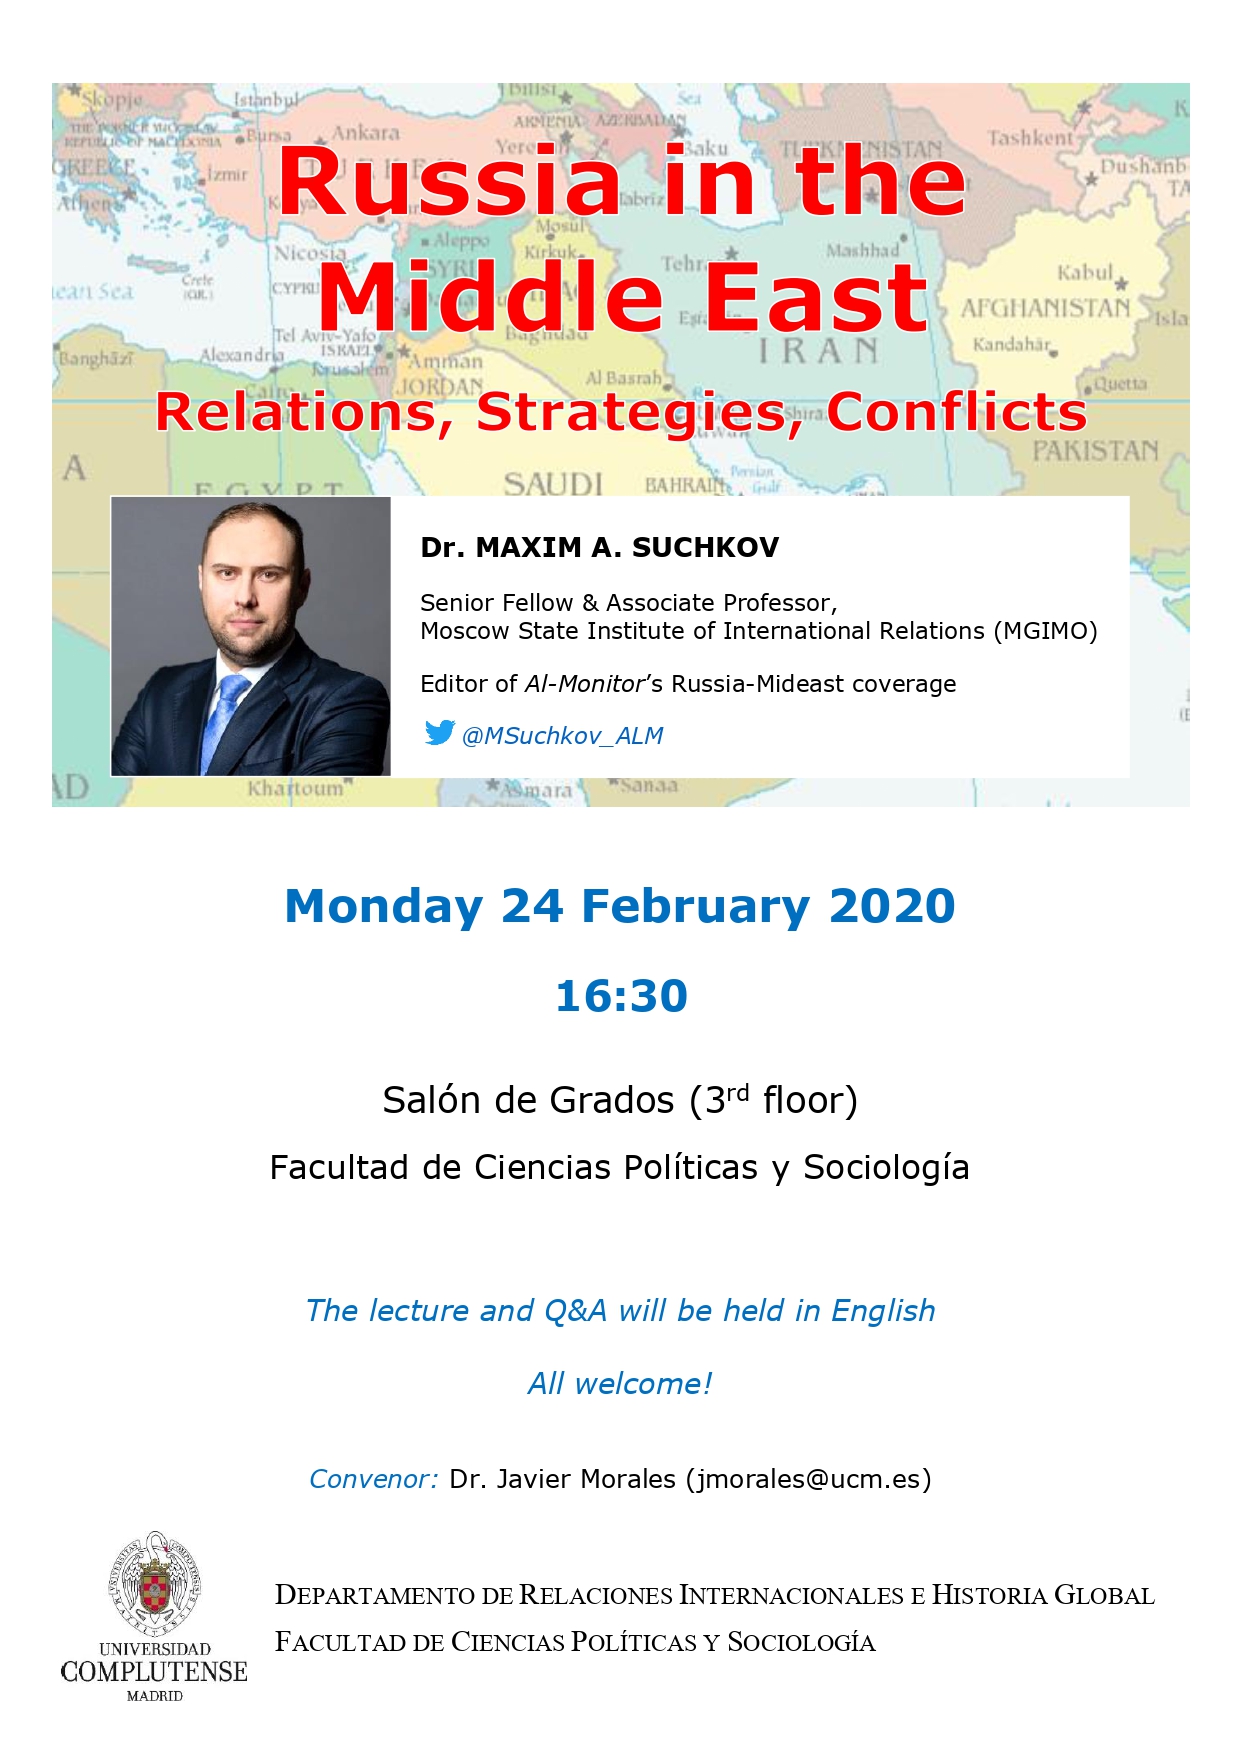 «Russia in the Middle East. Relations, Strategies, Conclicts.» Conferencia de Dr. Maxim A. Suchkov. Senior Fellow & Associate Professor, Moscow State Institute of International Relations (MGIMO) - 1